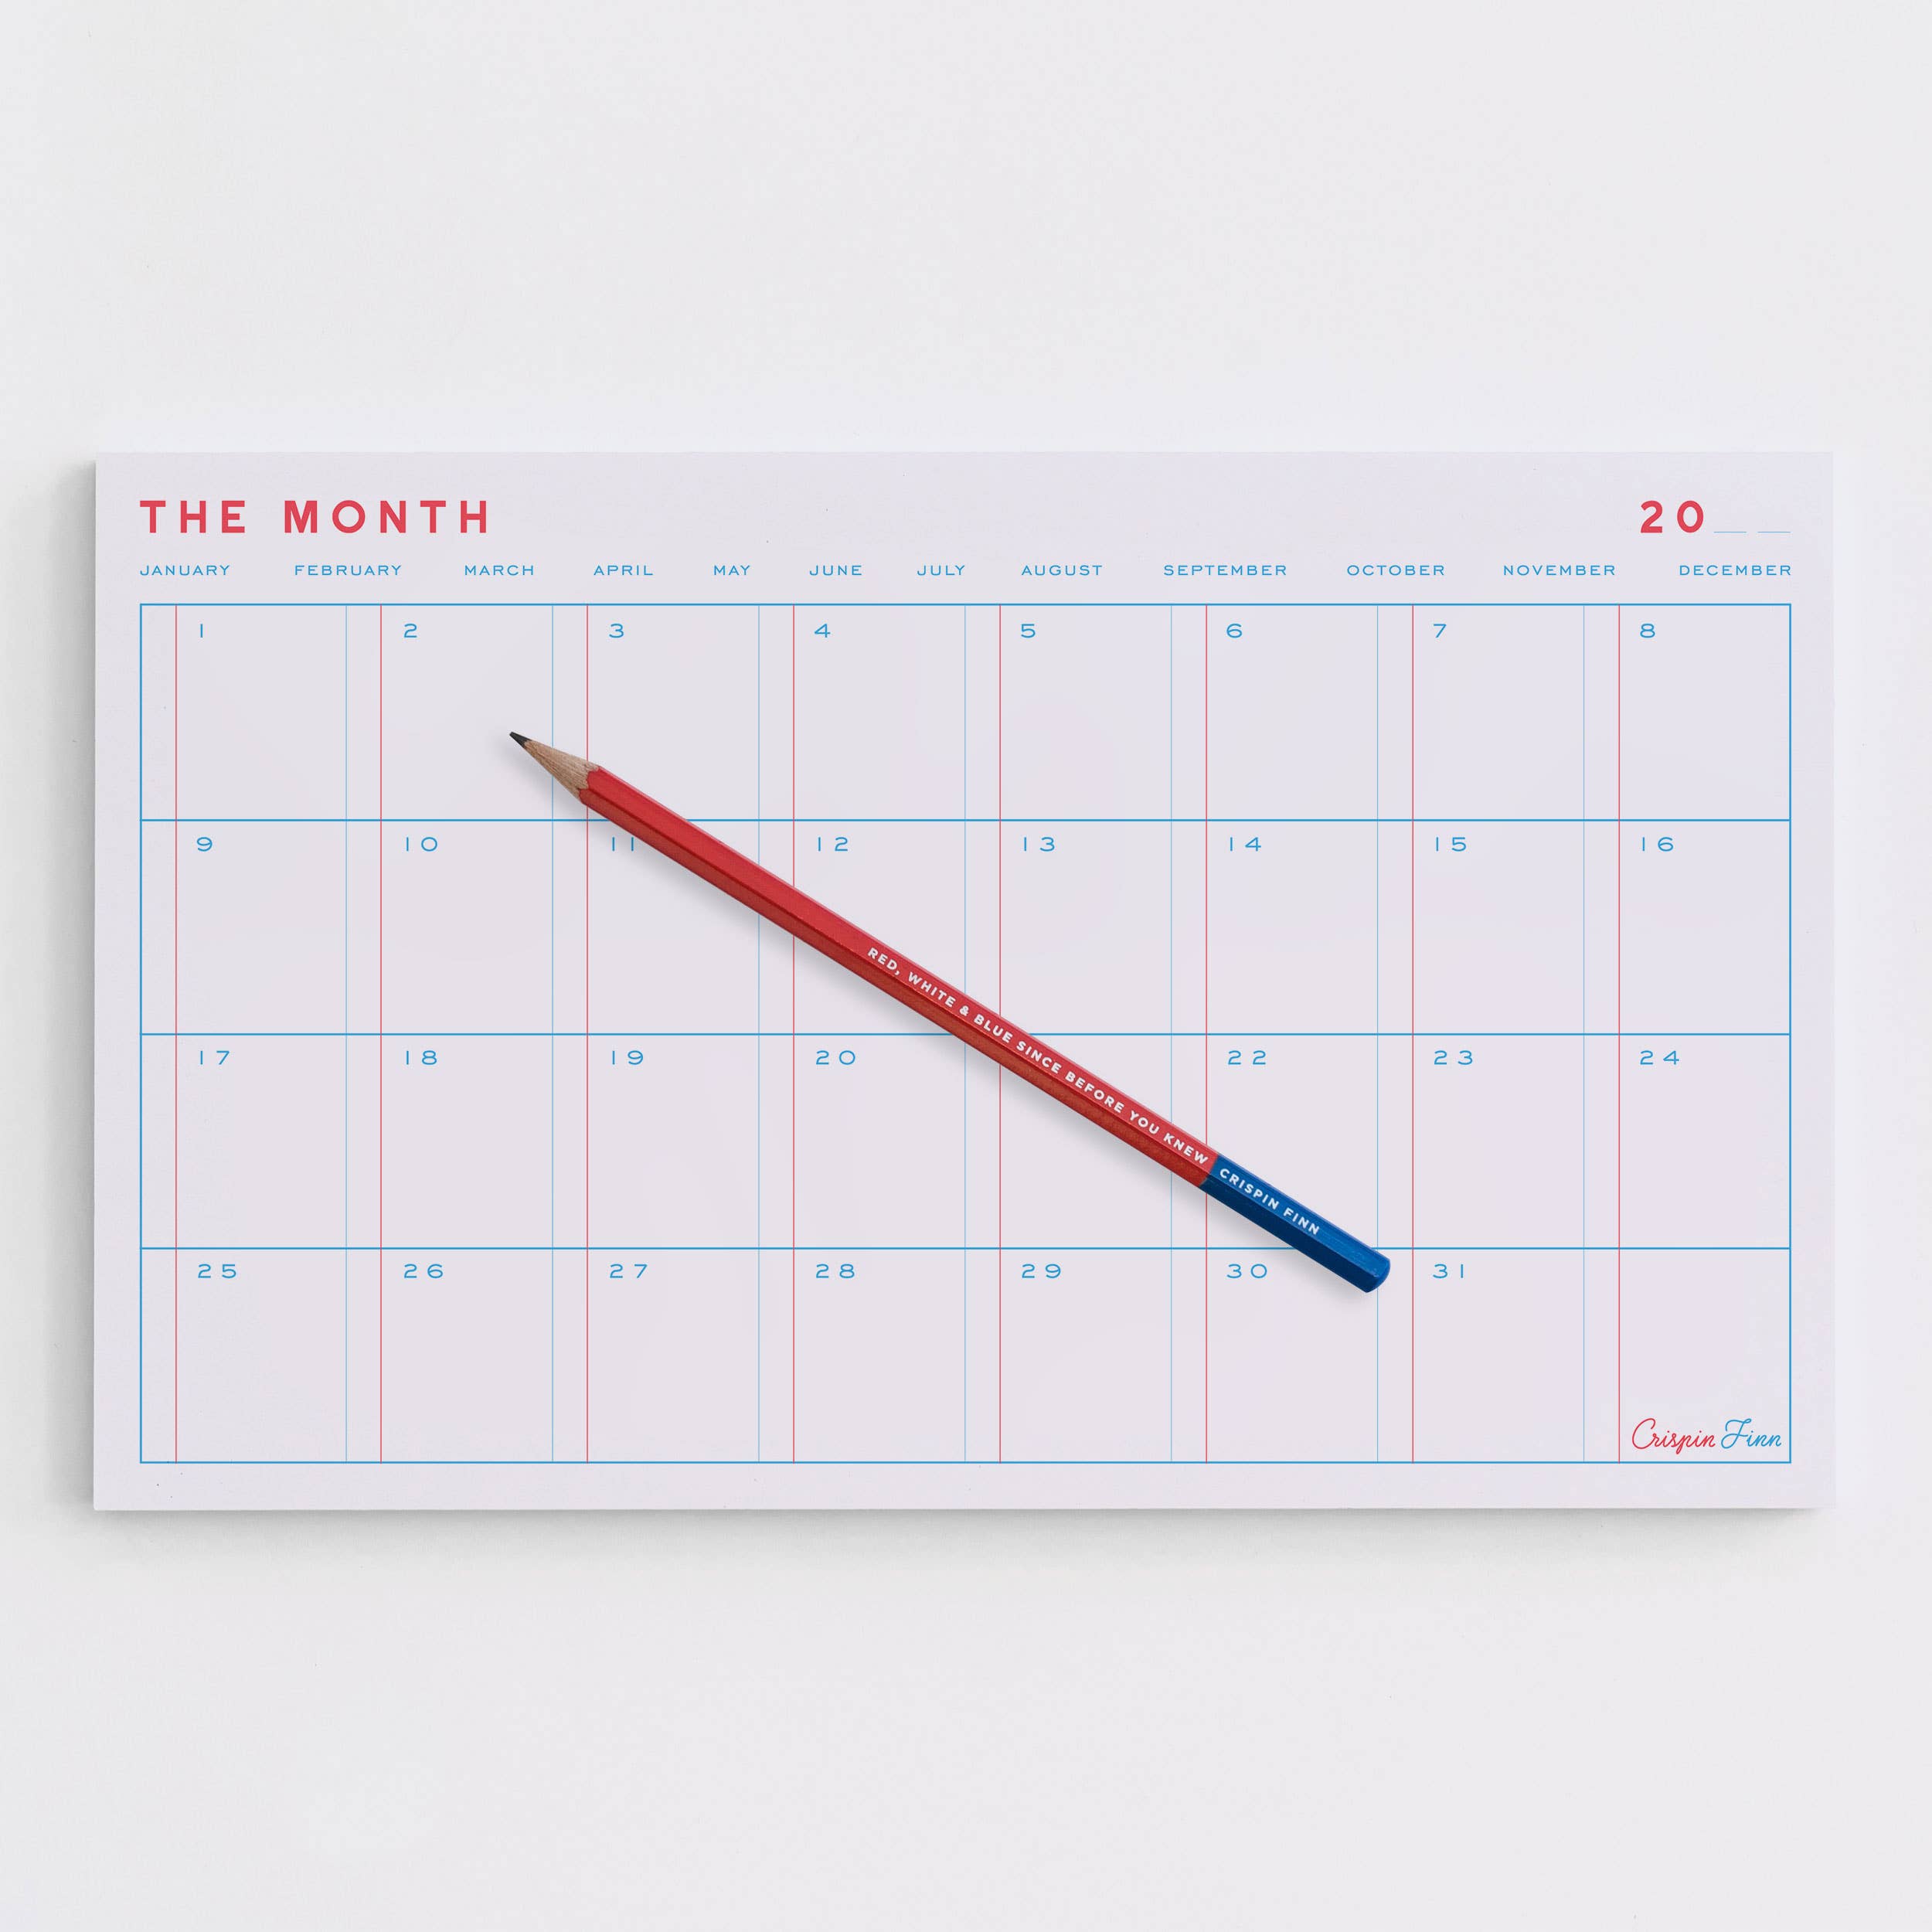 Crispin finn The month notepad